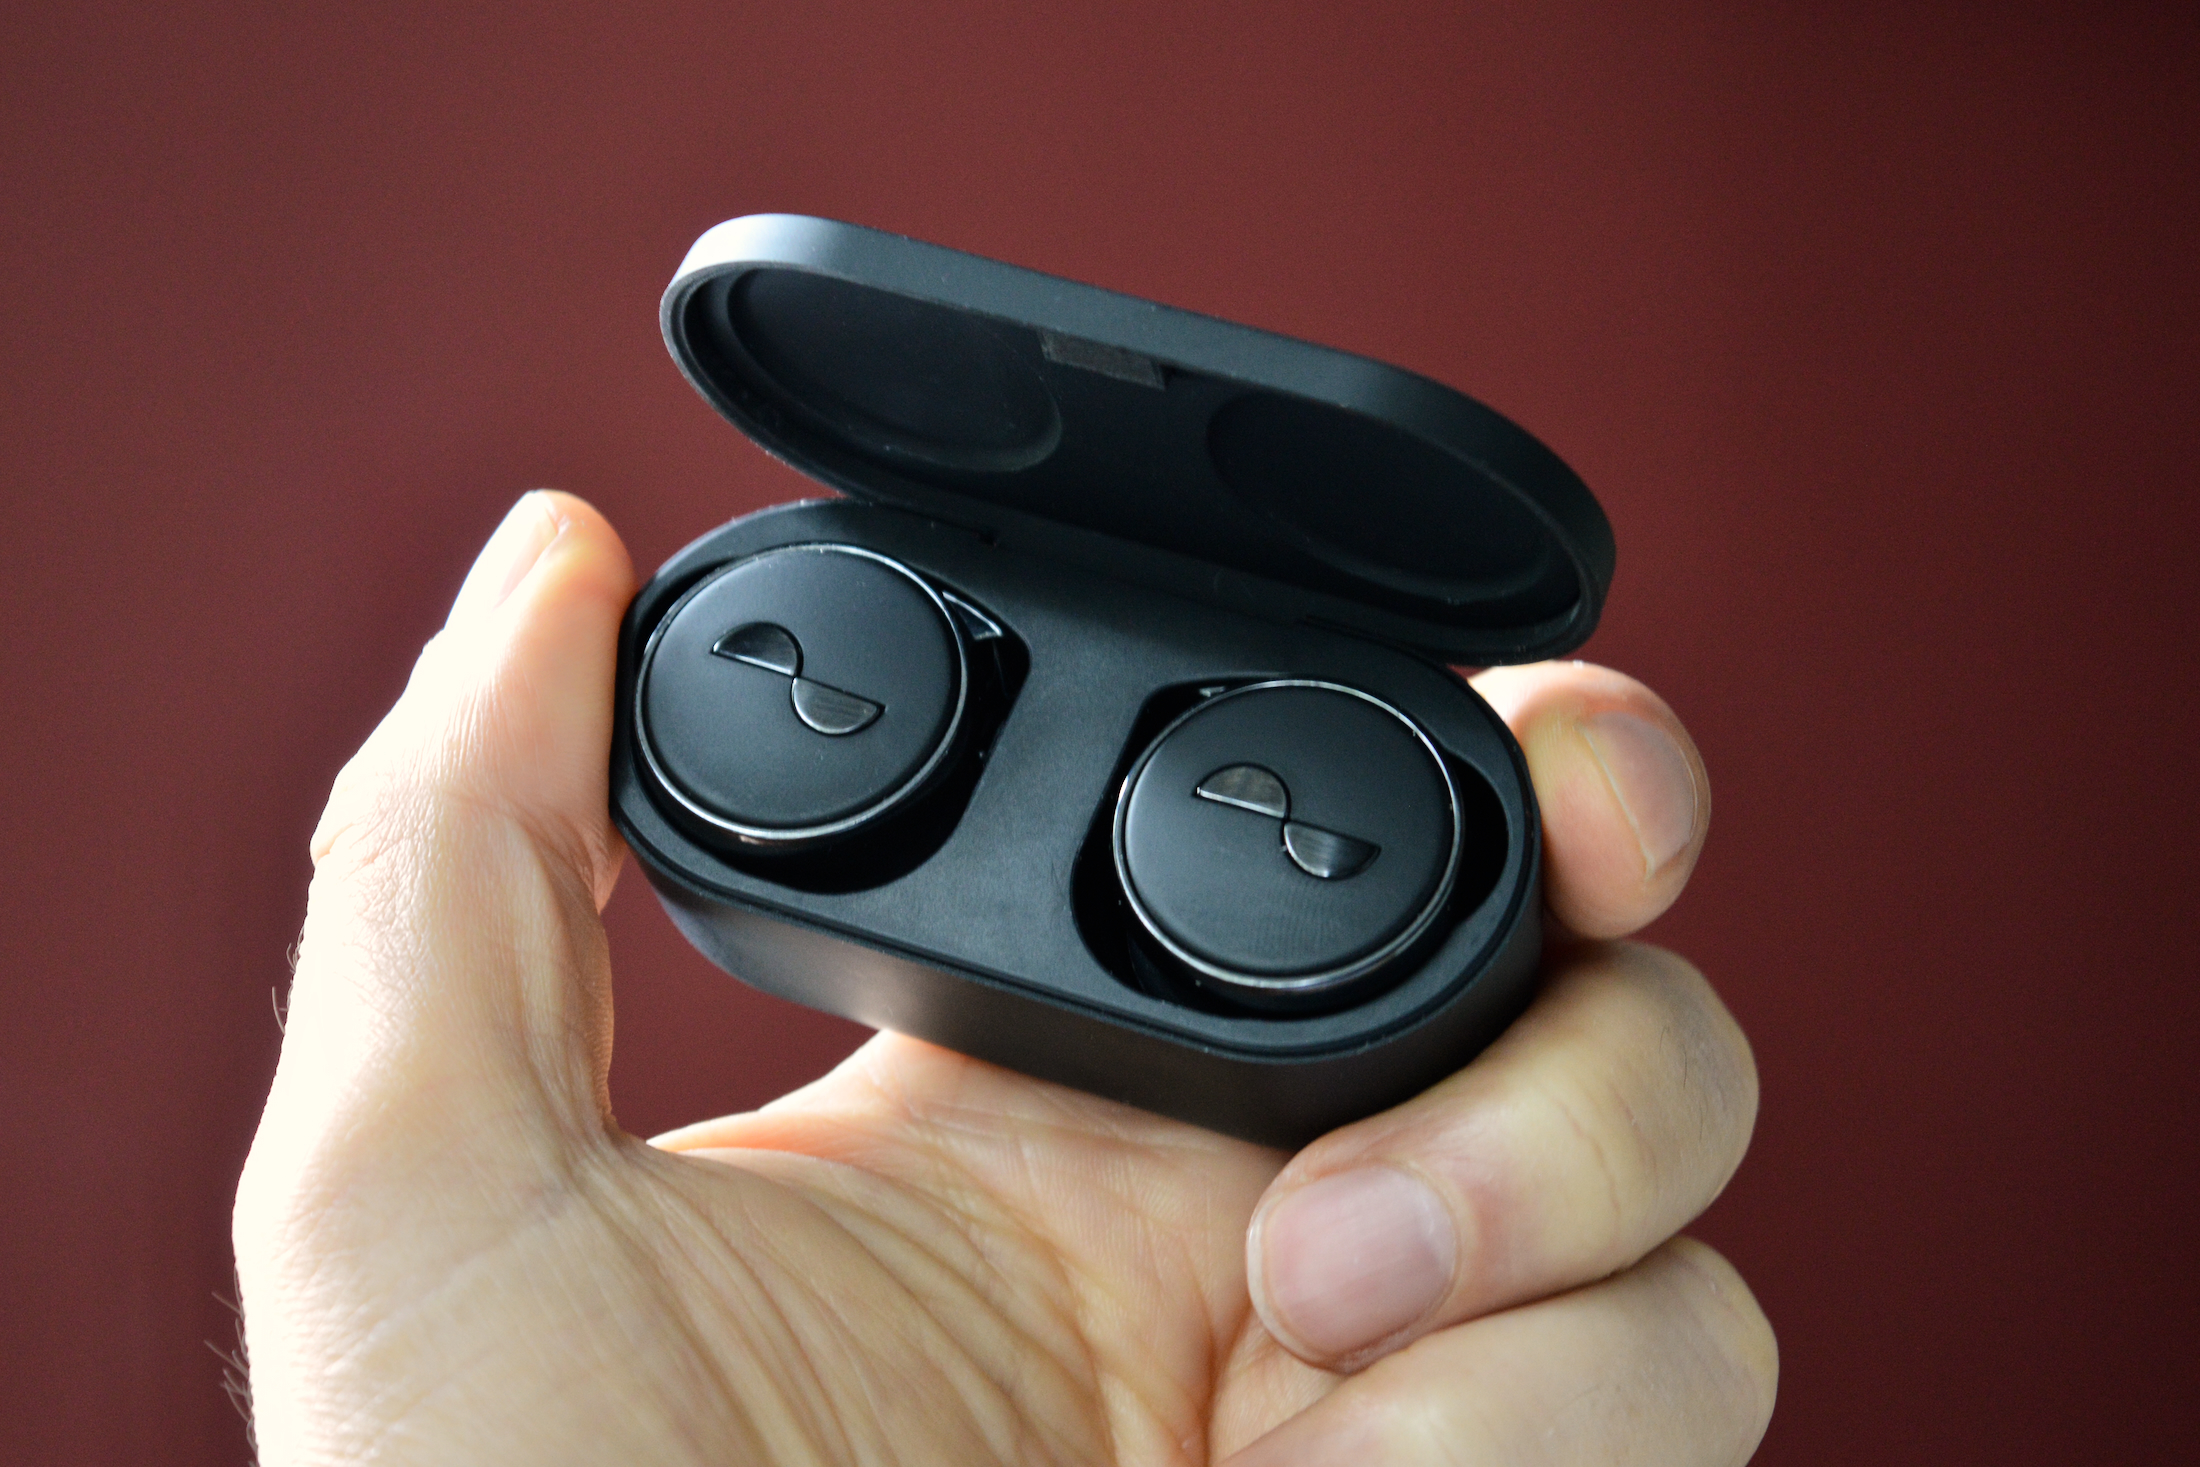 NuraTrue Pro fingers-on evaluate: The initially lossless wi-fi earbuds